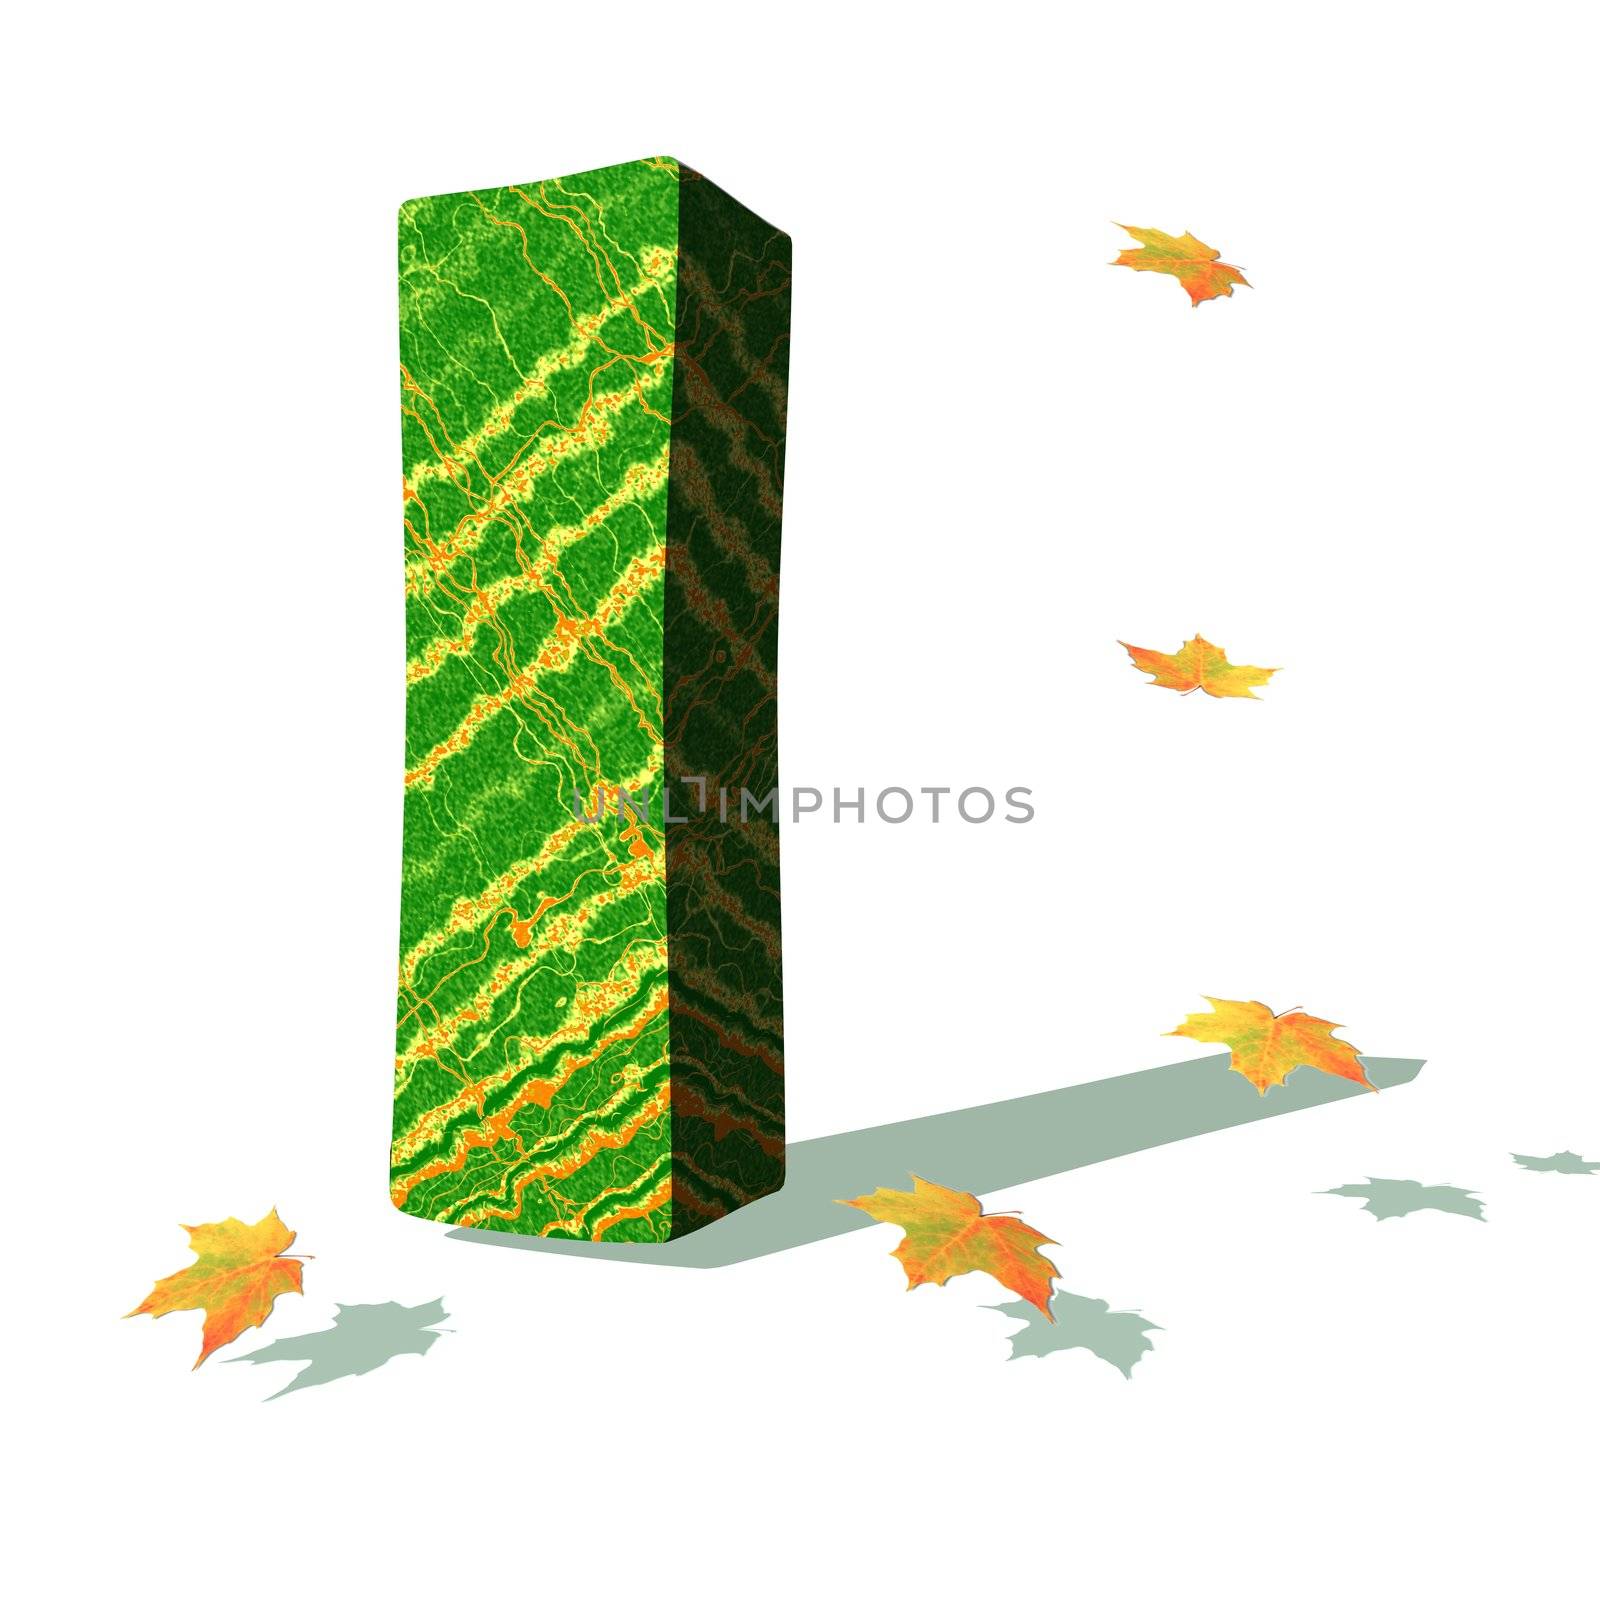 Green ecological I capital letter surrounded by few autumn falling leaves in a white background with shadows